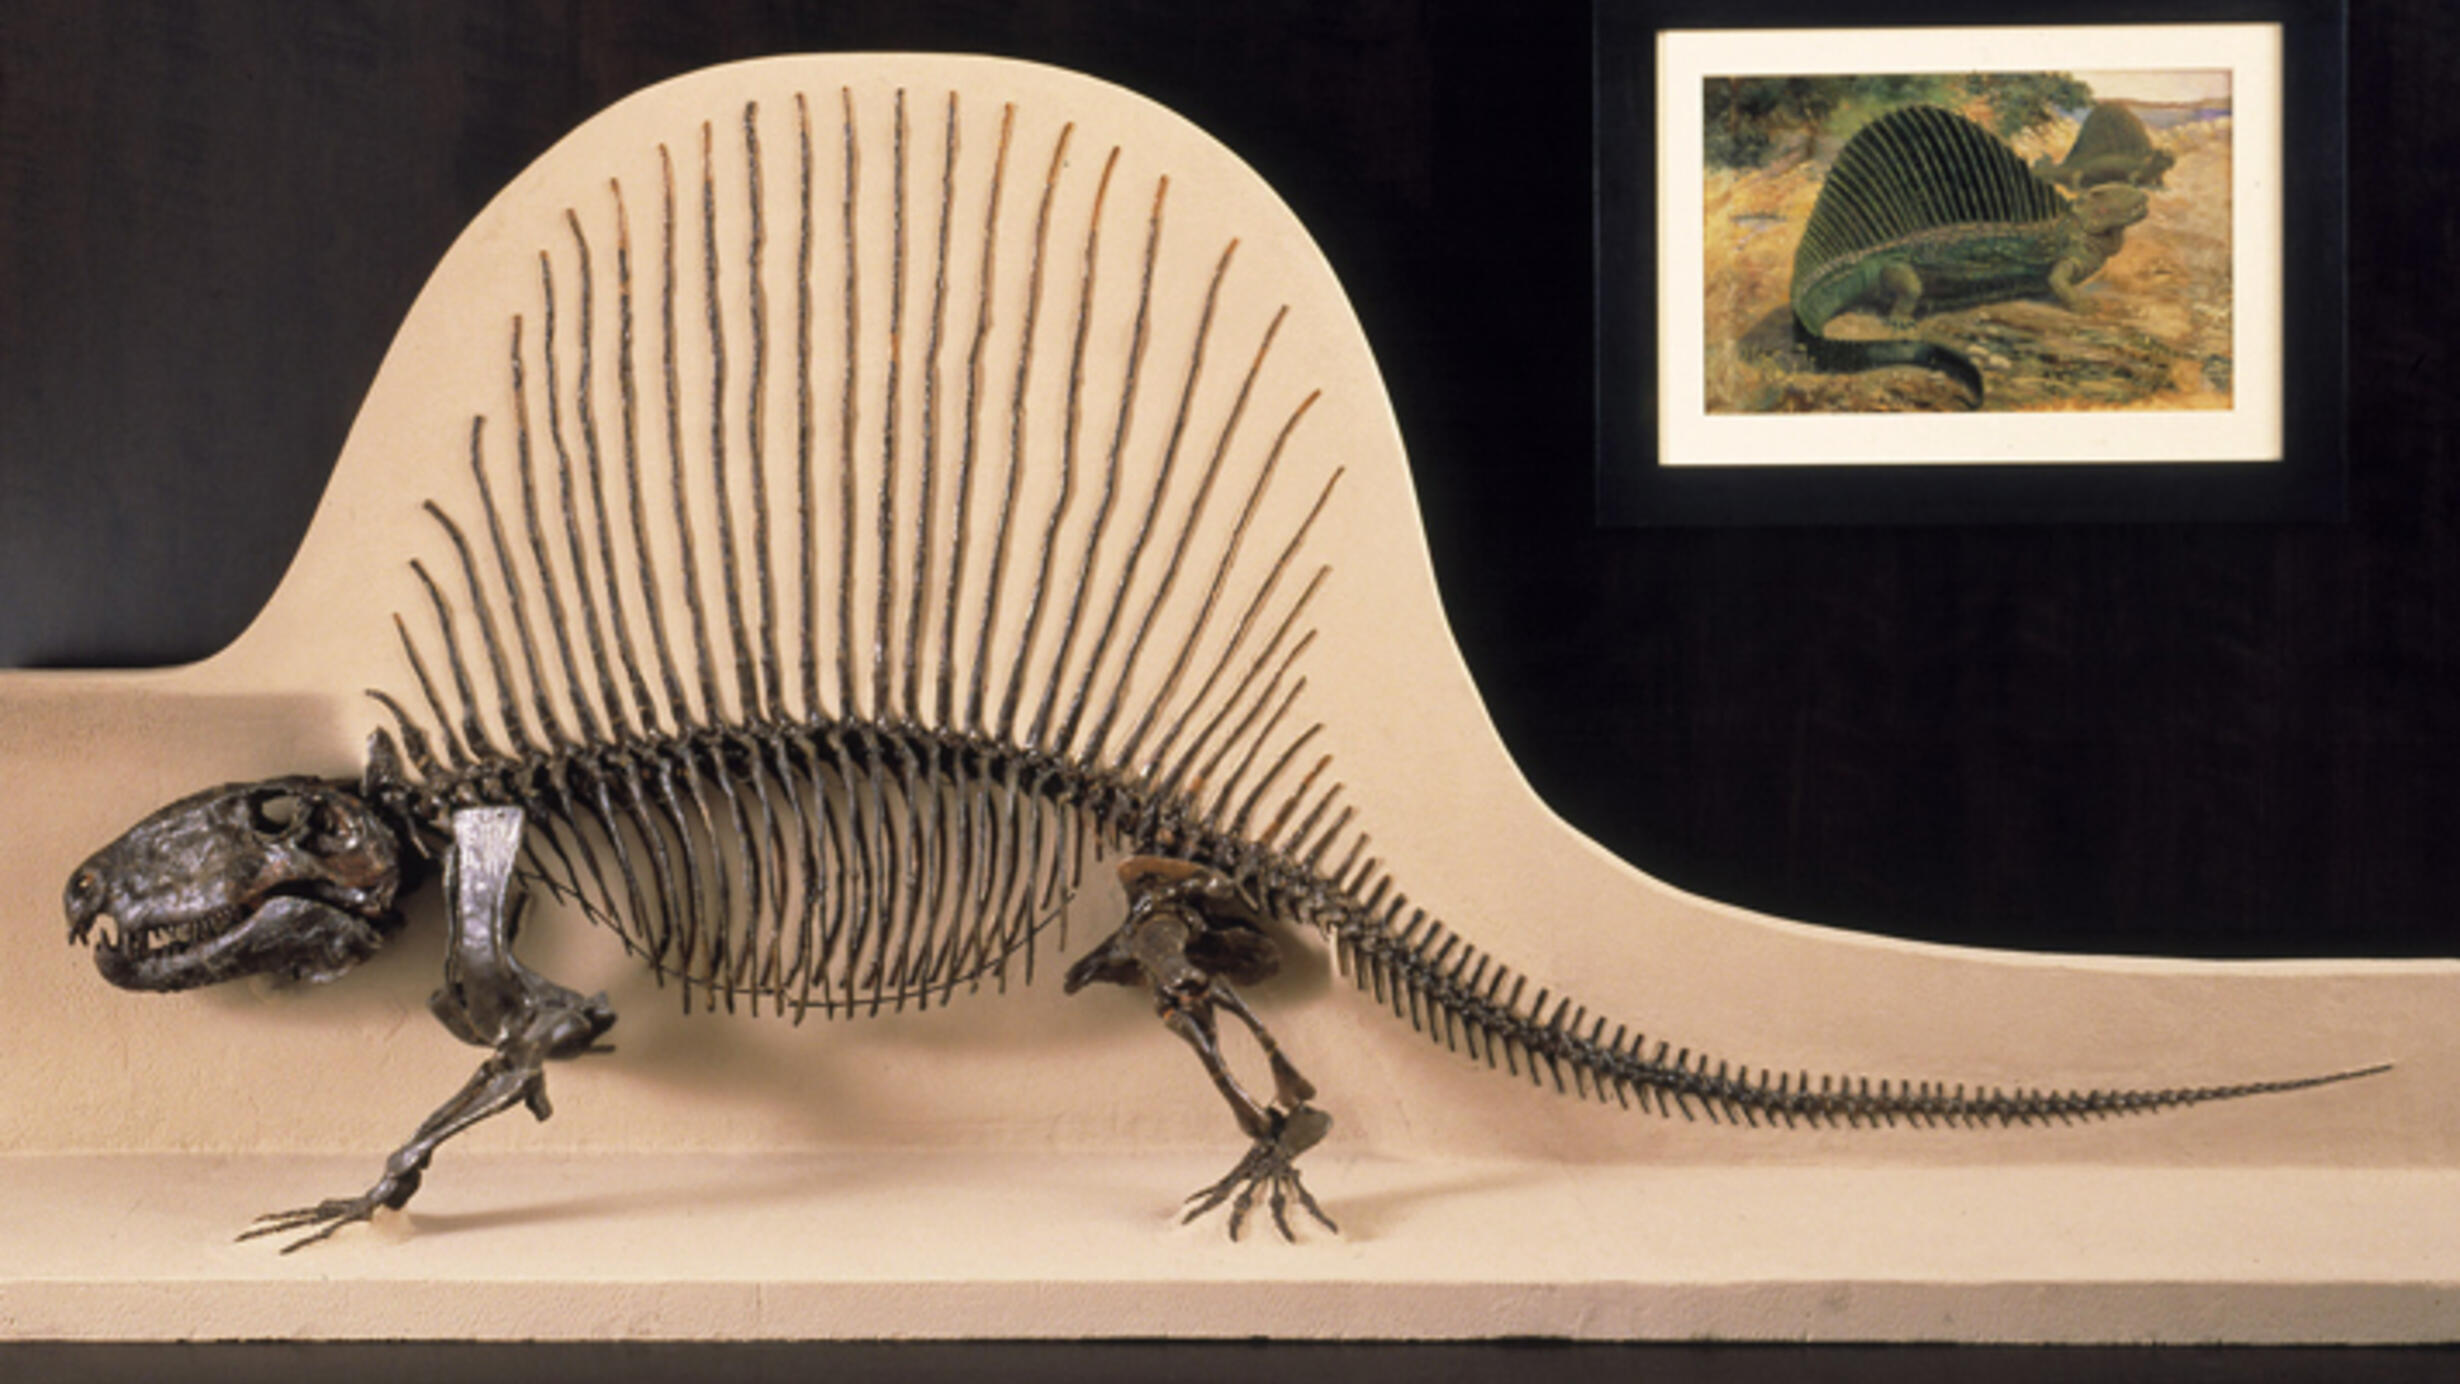 Fossil skeleton of a dimetrodon with its high arch of long thin spines along its vertebrae.